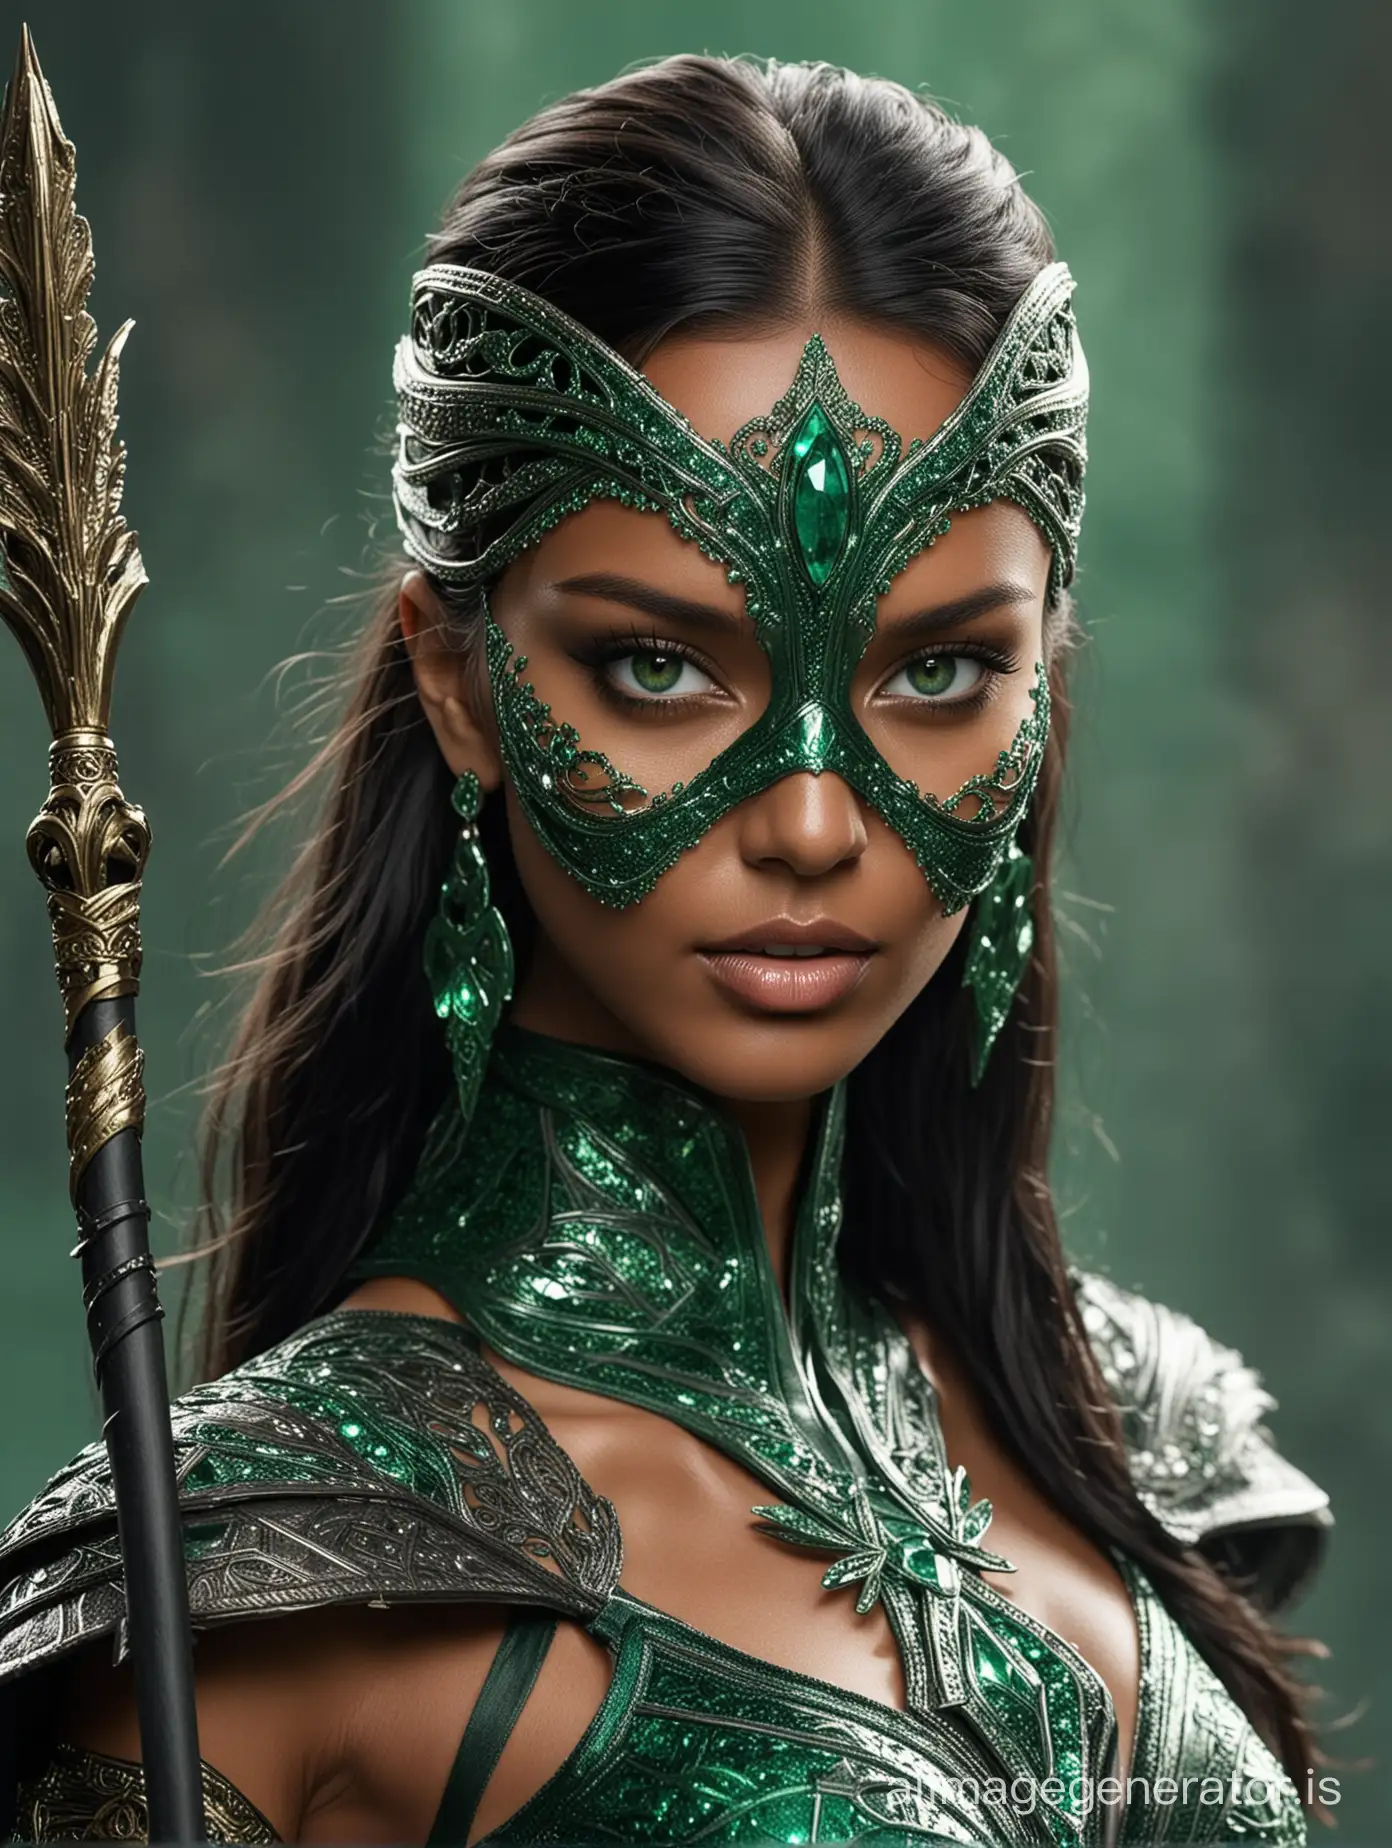 Lais Ribeiro as Jade, her green eyes intense. Focus on intricate mask details, the glint of her bo staff, and the textures of her emerald costume.